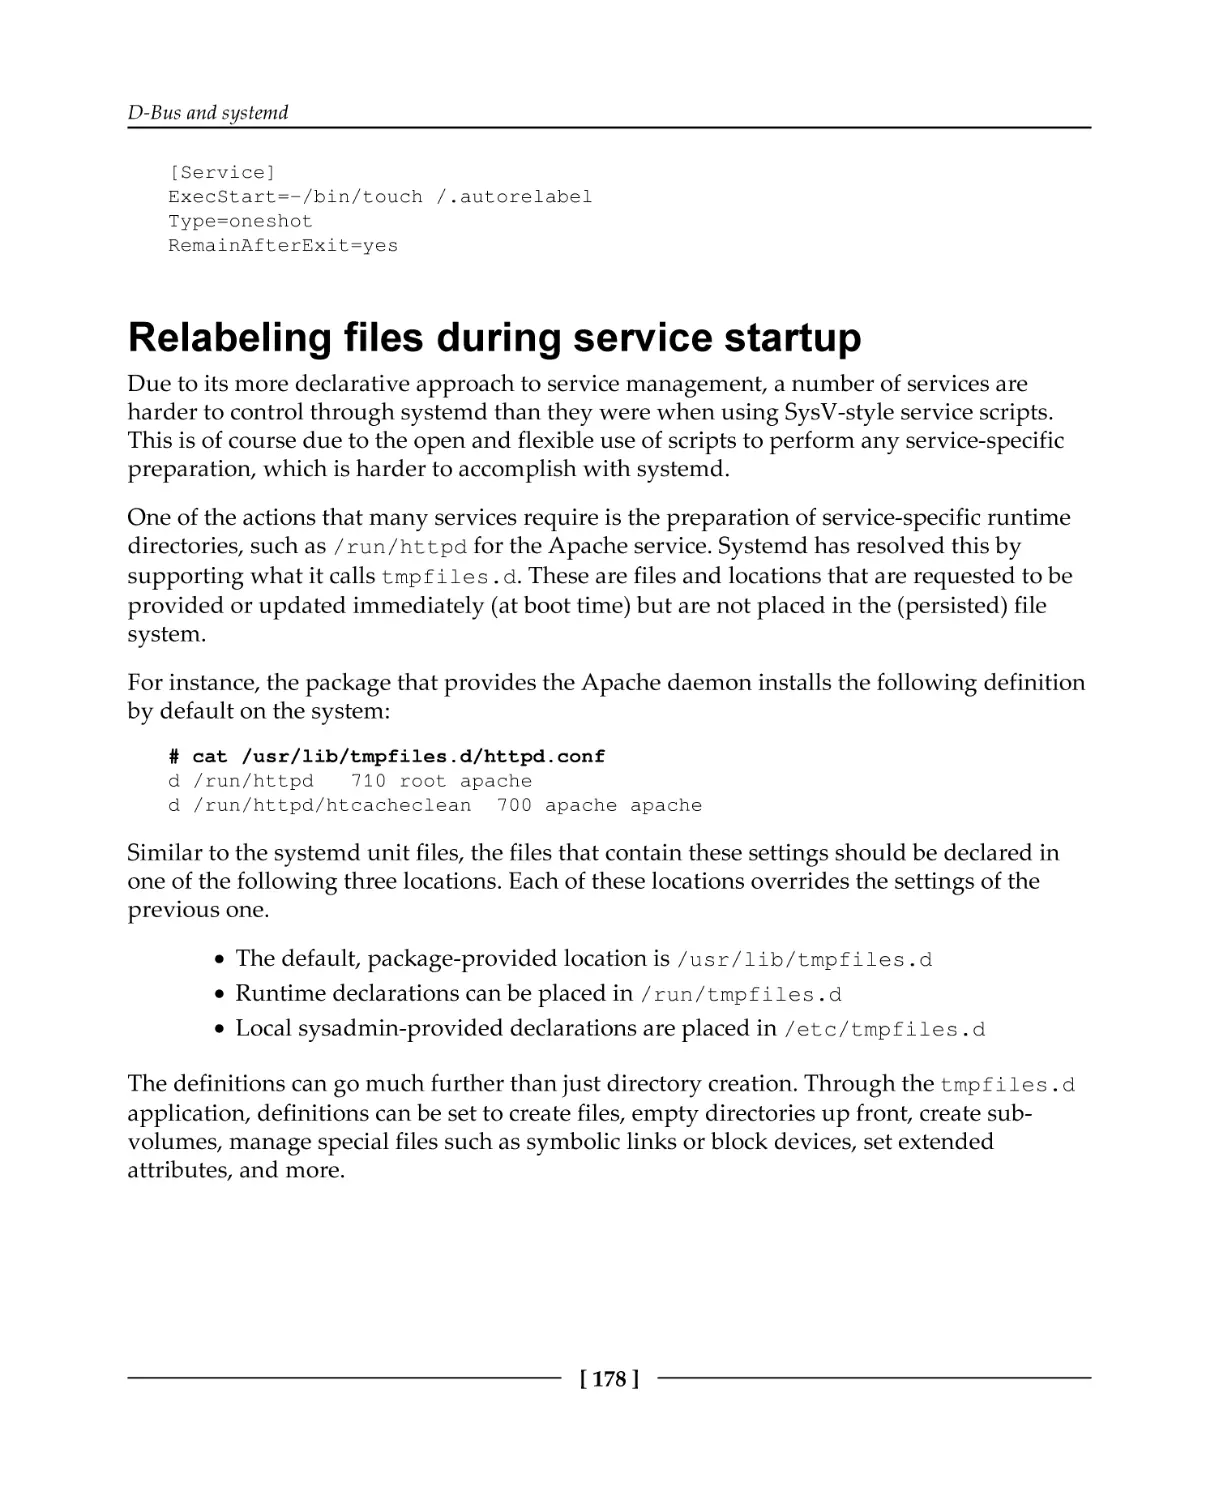 Relabeling files during service startup